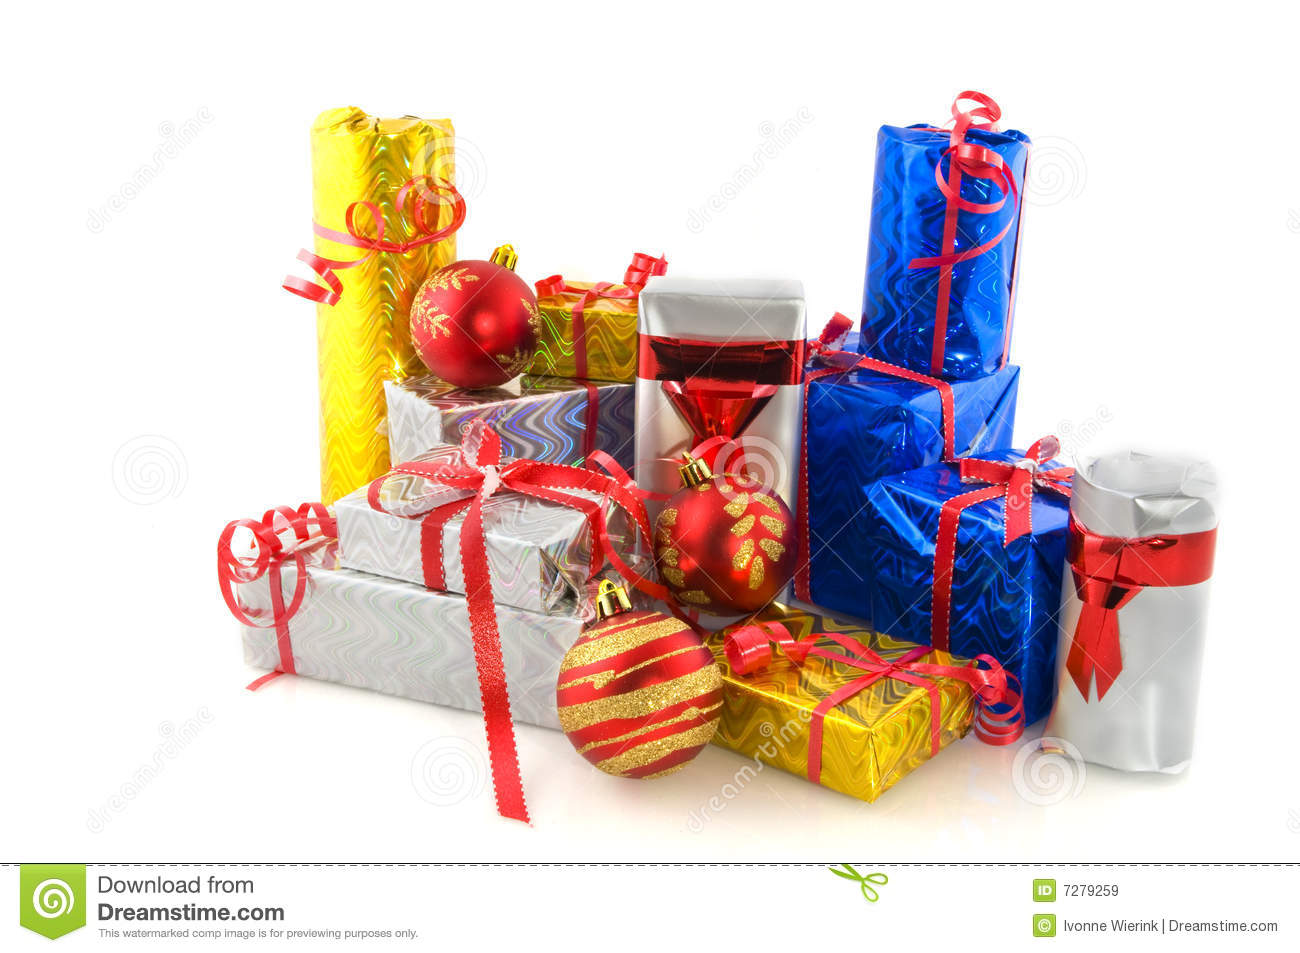 Many Presents For Christmas Royalty Free Stock Images   Image  7279259